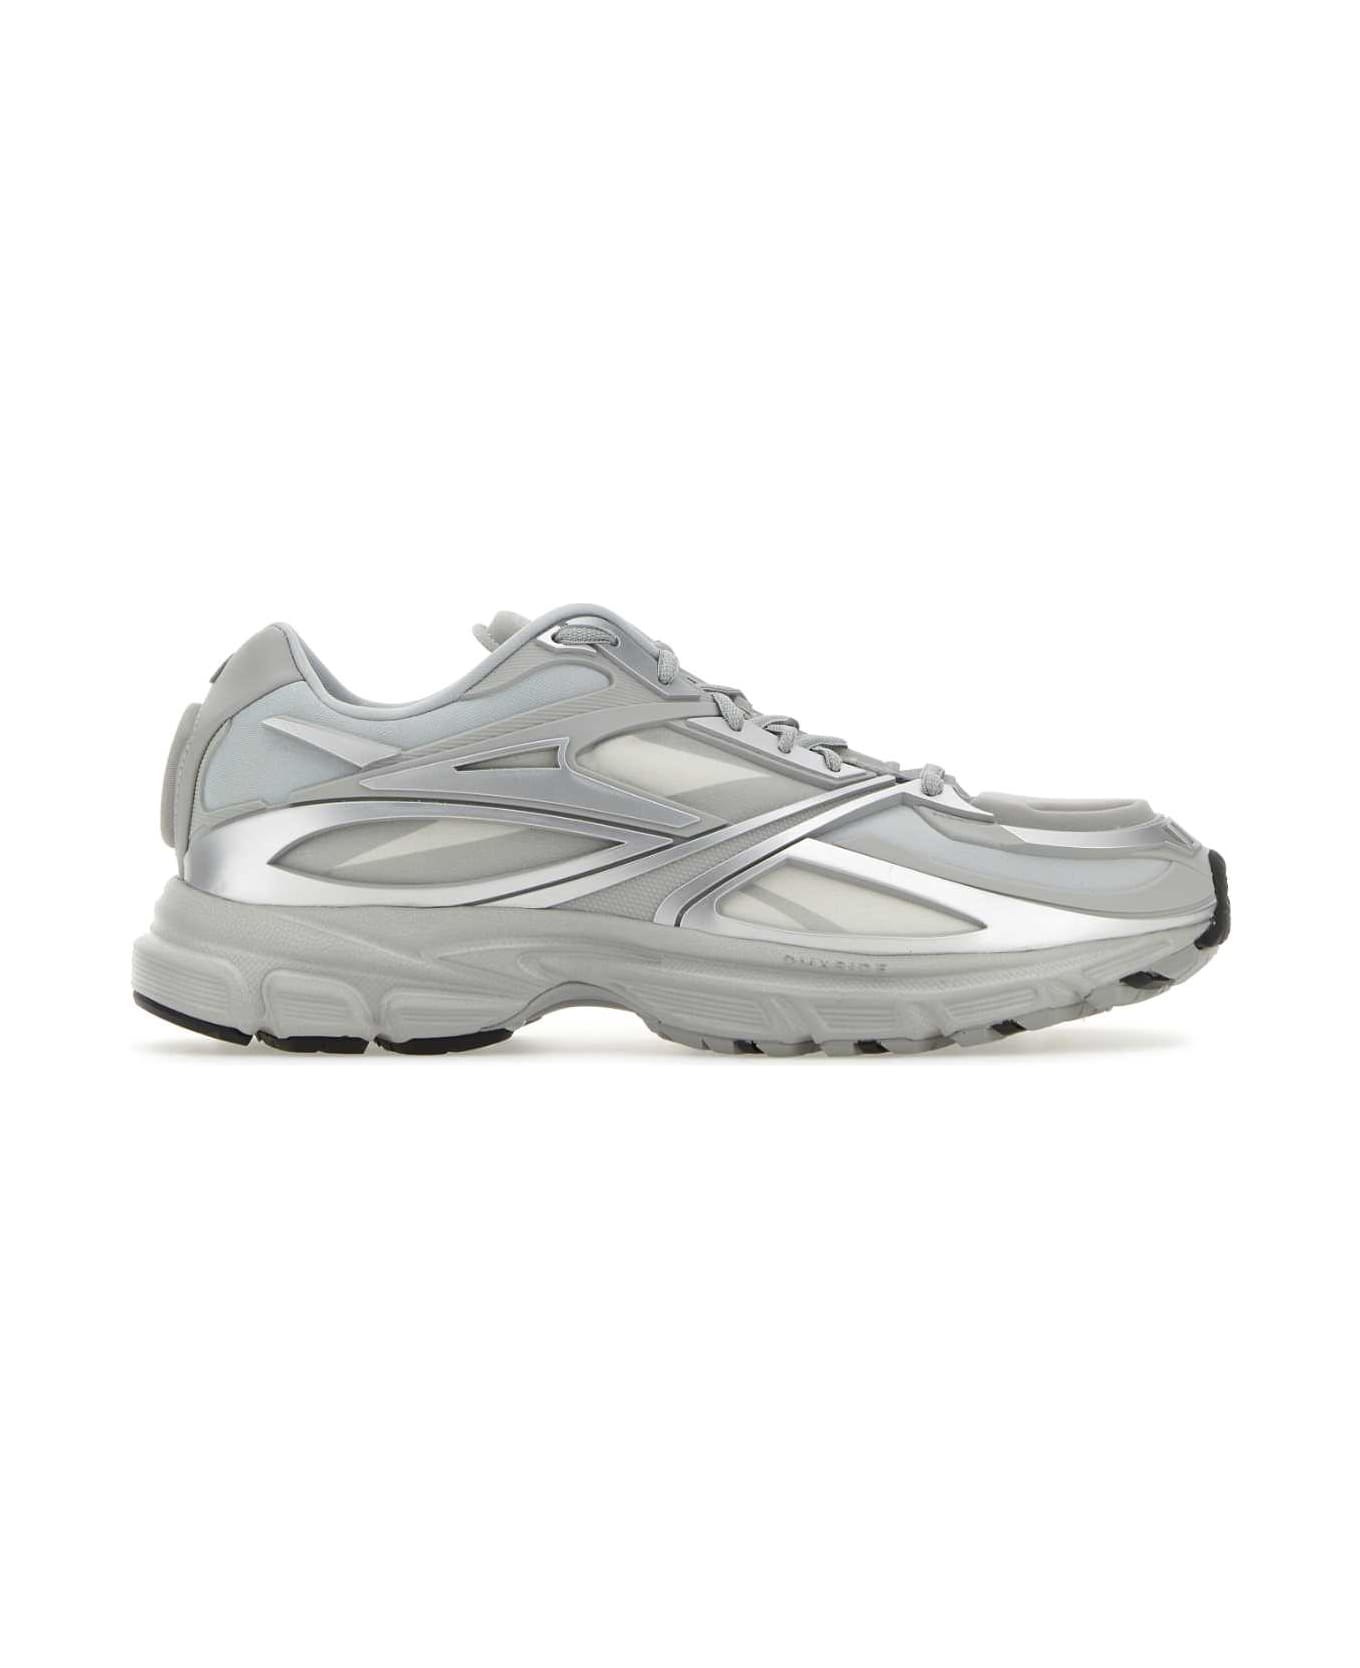 Reebok Grey Fabric And Rubber Premier Road Modern Sneakers - SILVER